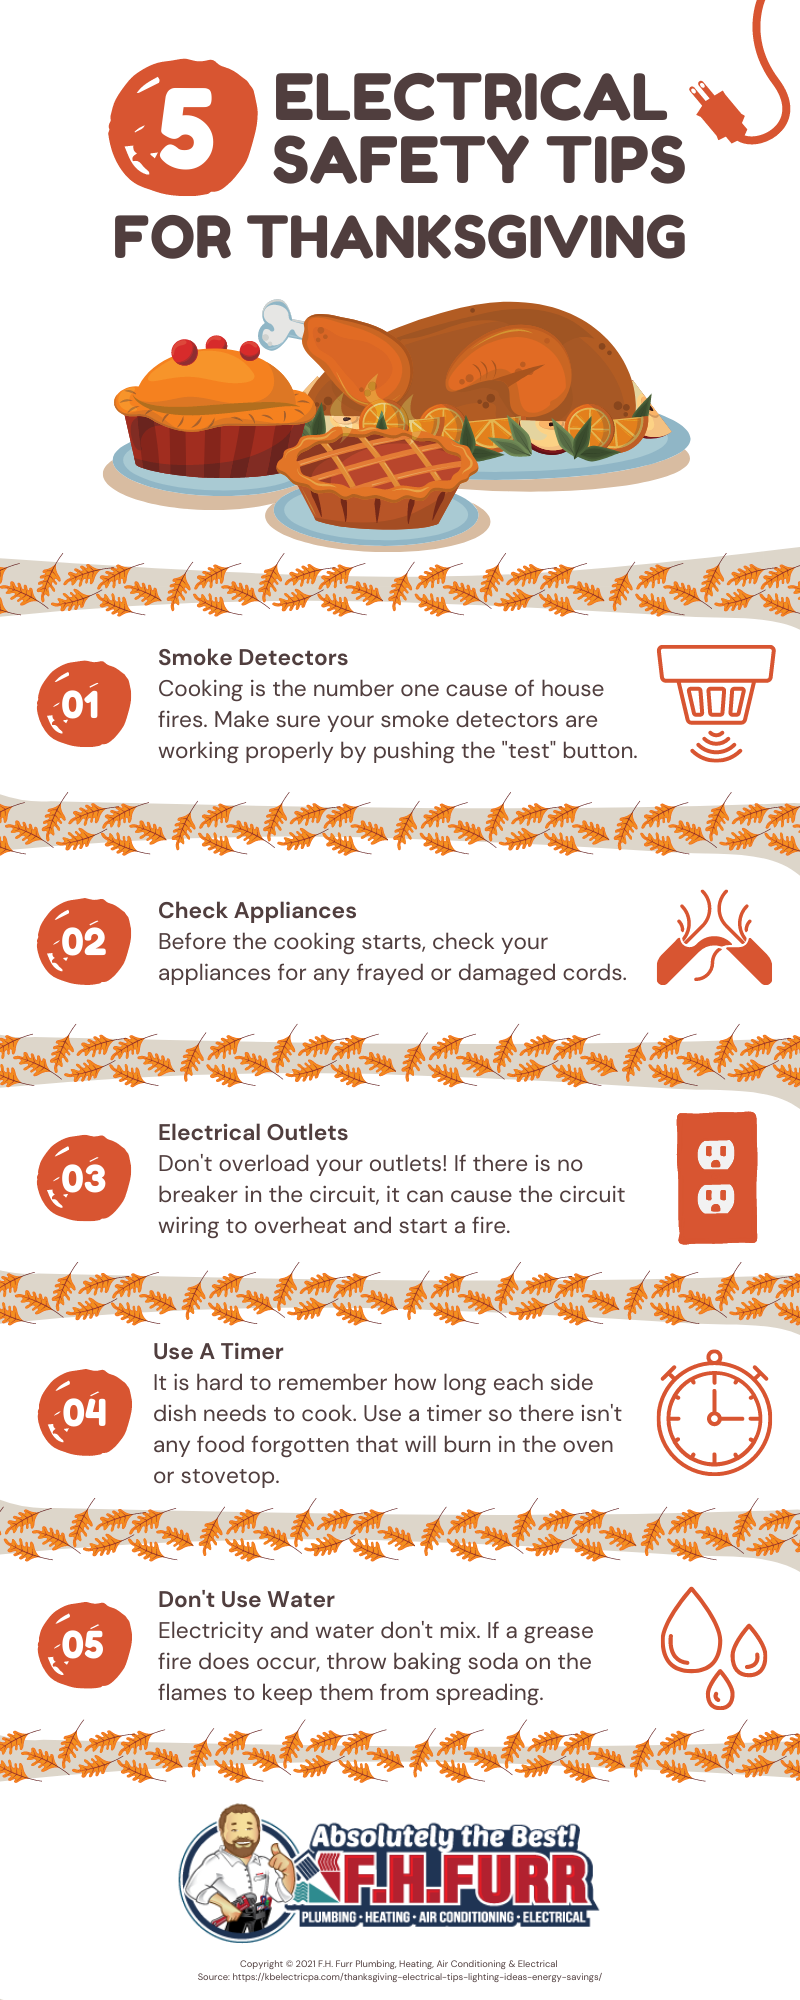 An infographic with 5 electrical safety tips to use during the Thanksgiving season. The tips include checking that your smoke detectors are working properly, checking appliances for damaged cords before use, avoiding overloading outlets, using timers when cooking or baking, and not using water to put out a grease fire.